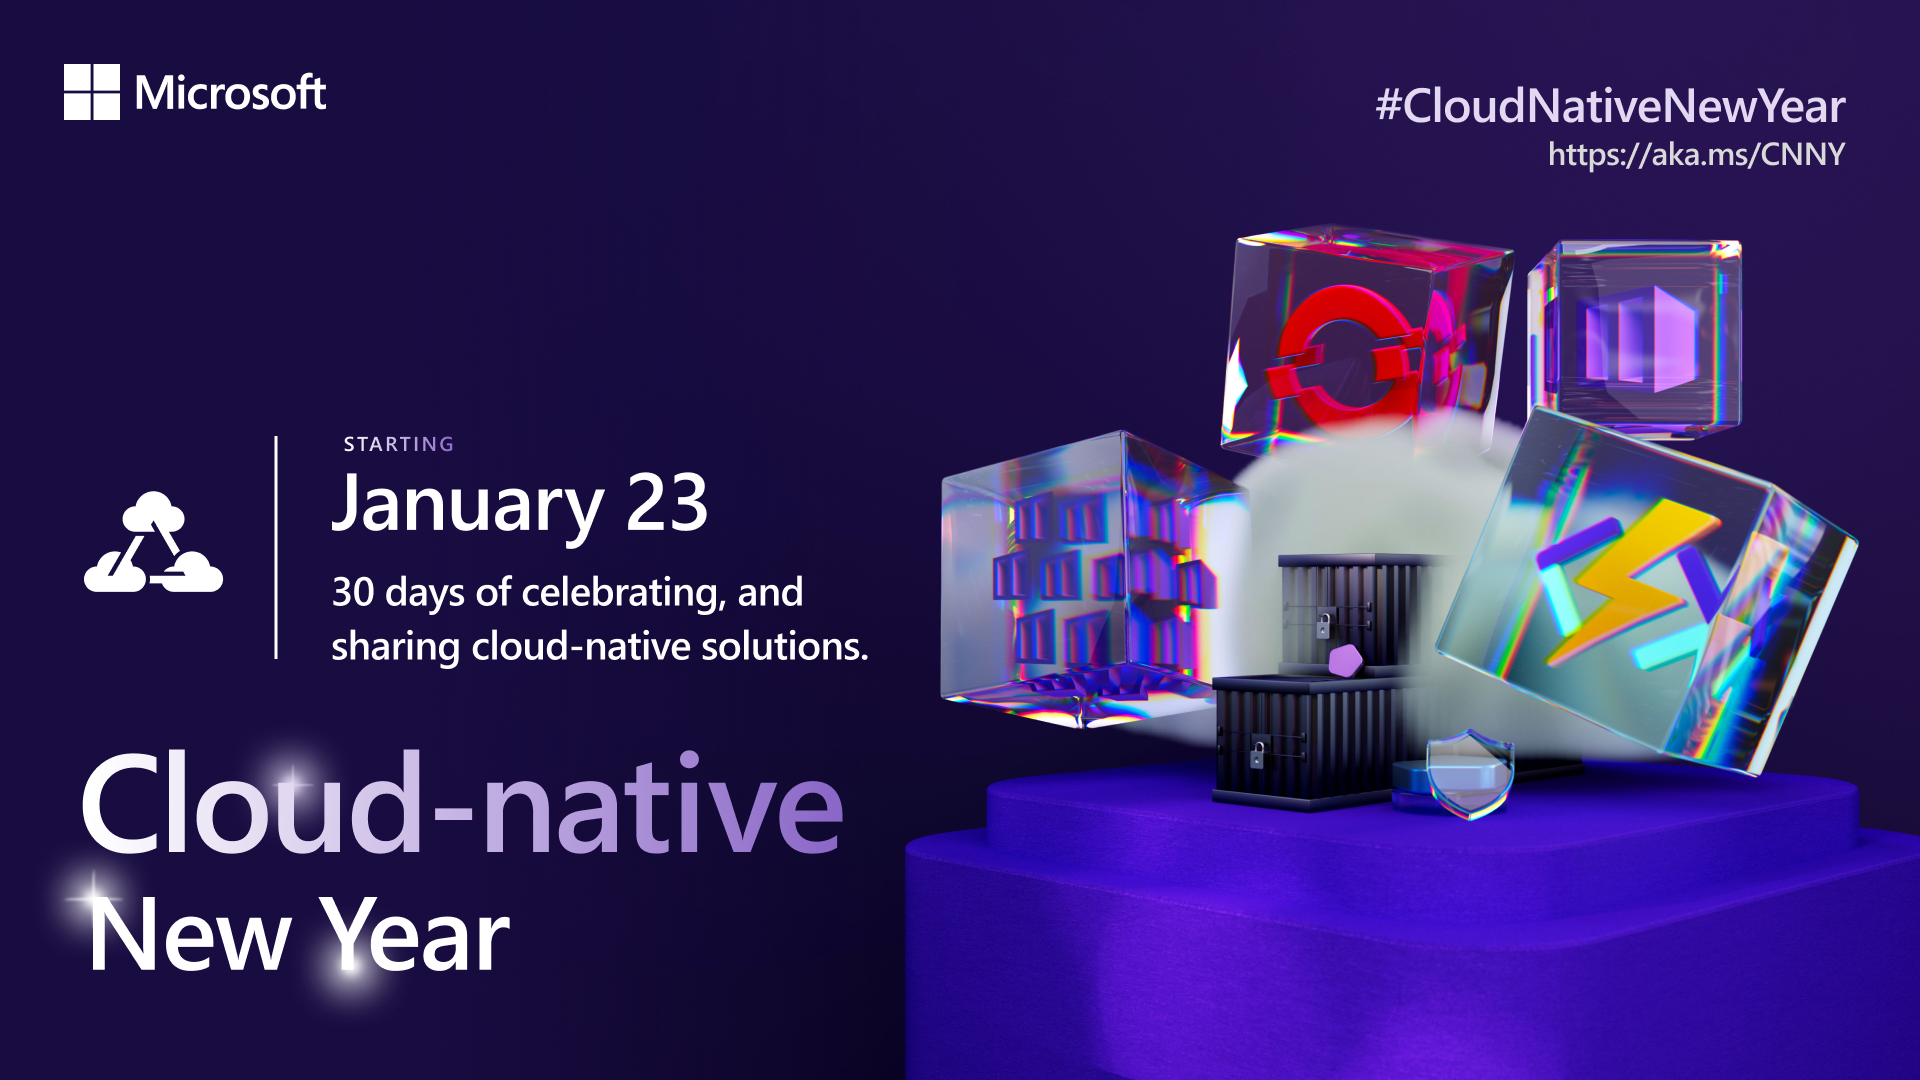 Welcome to Cloud-native New Year!